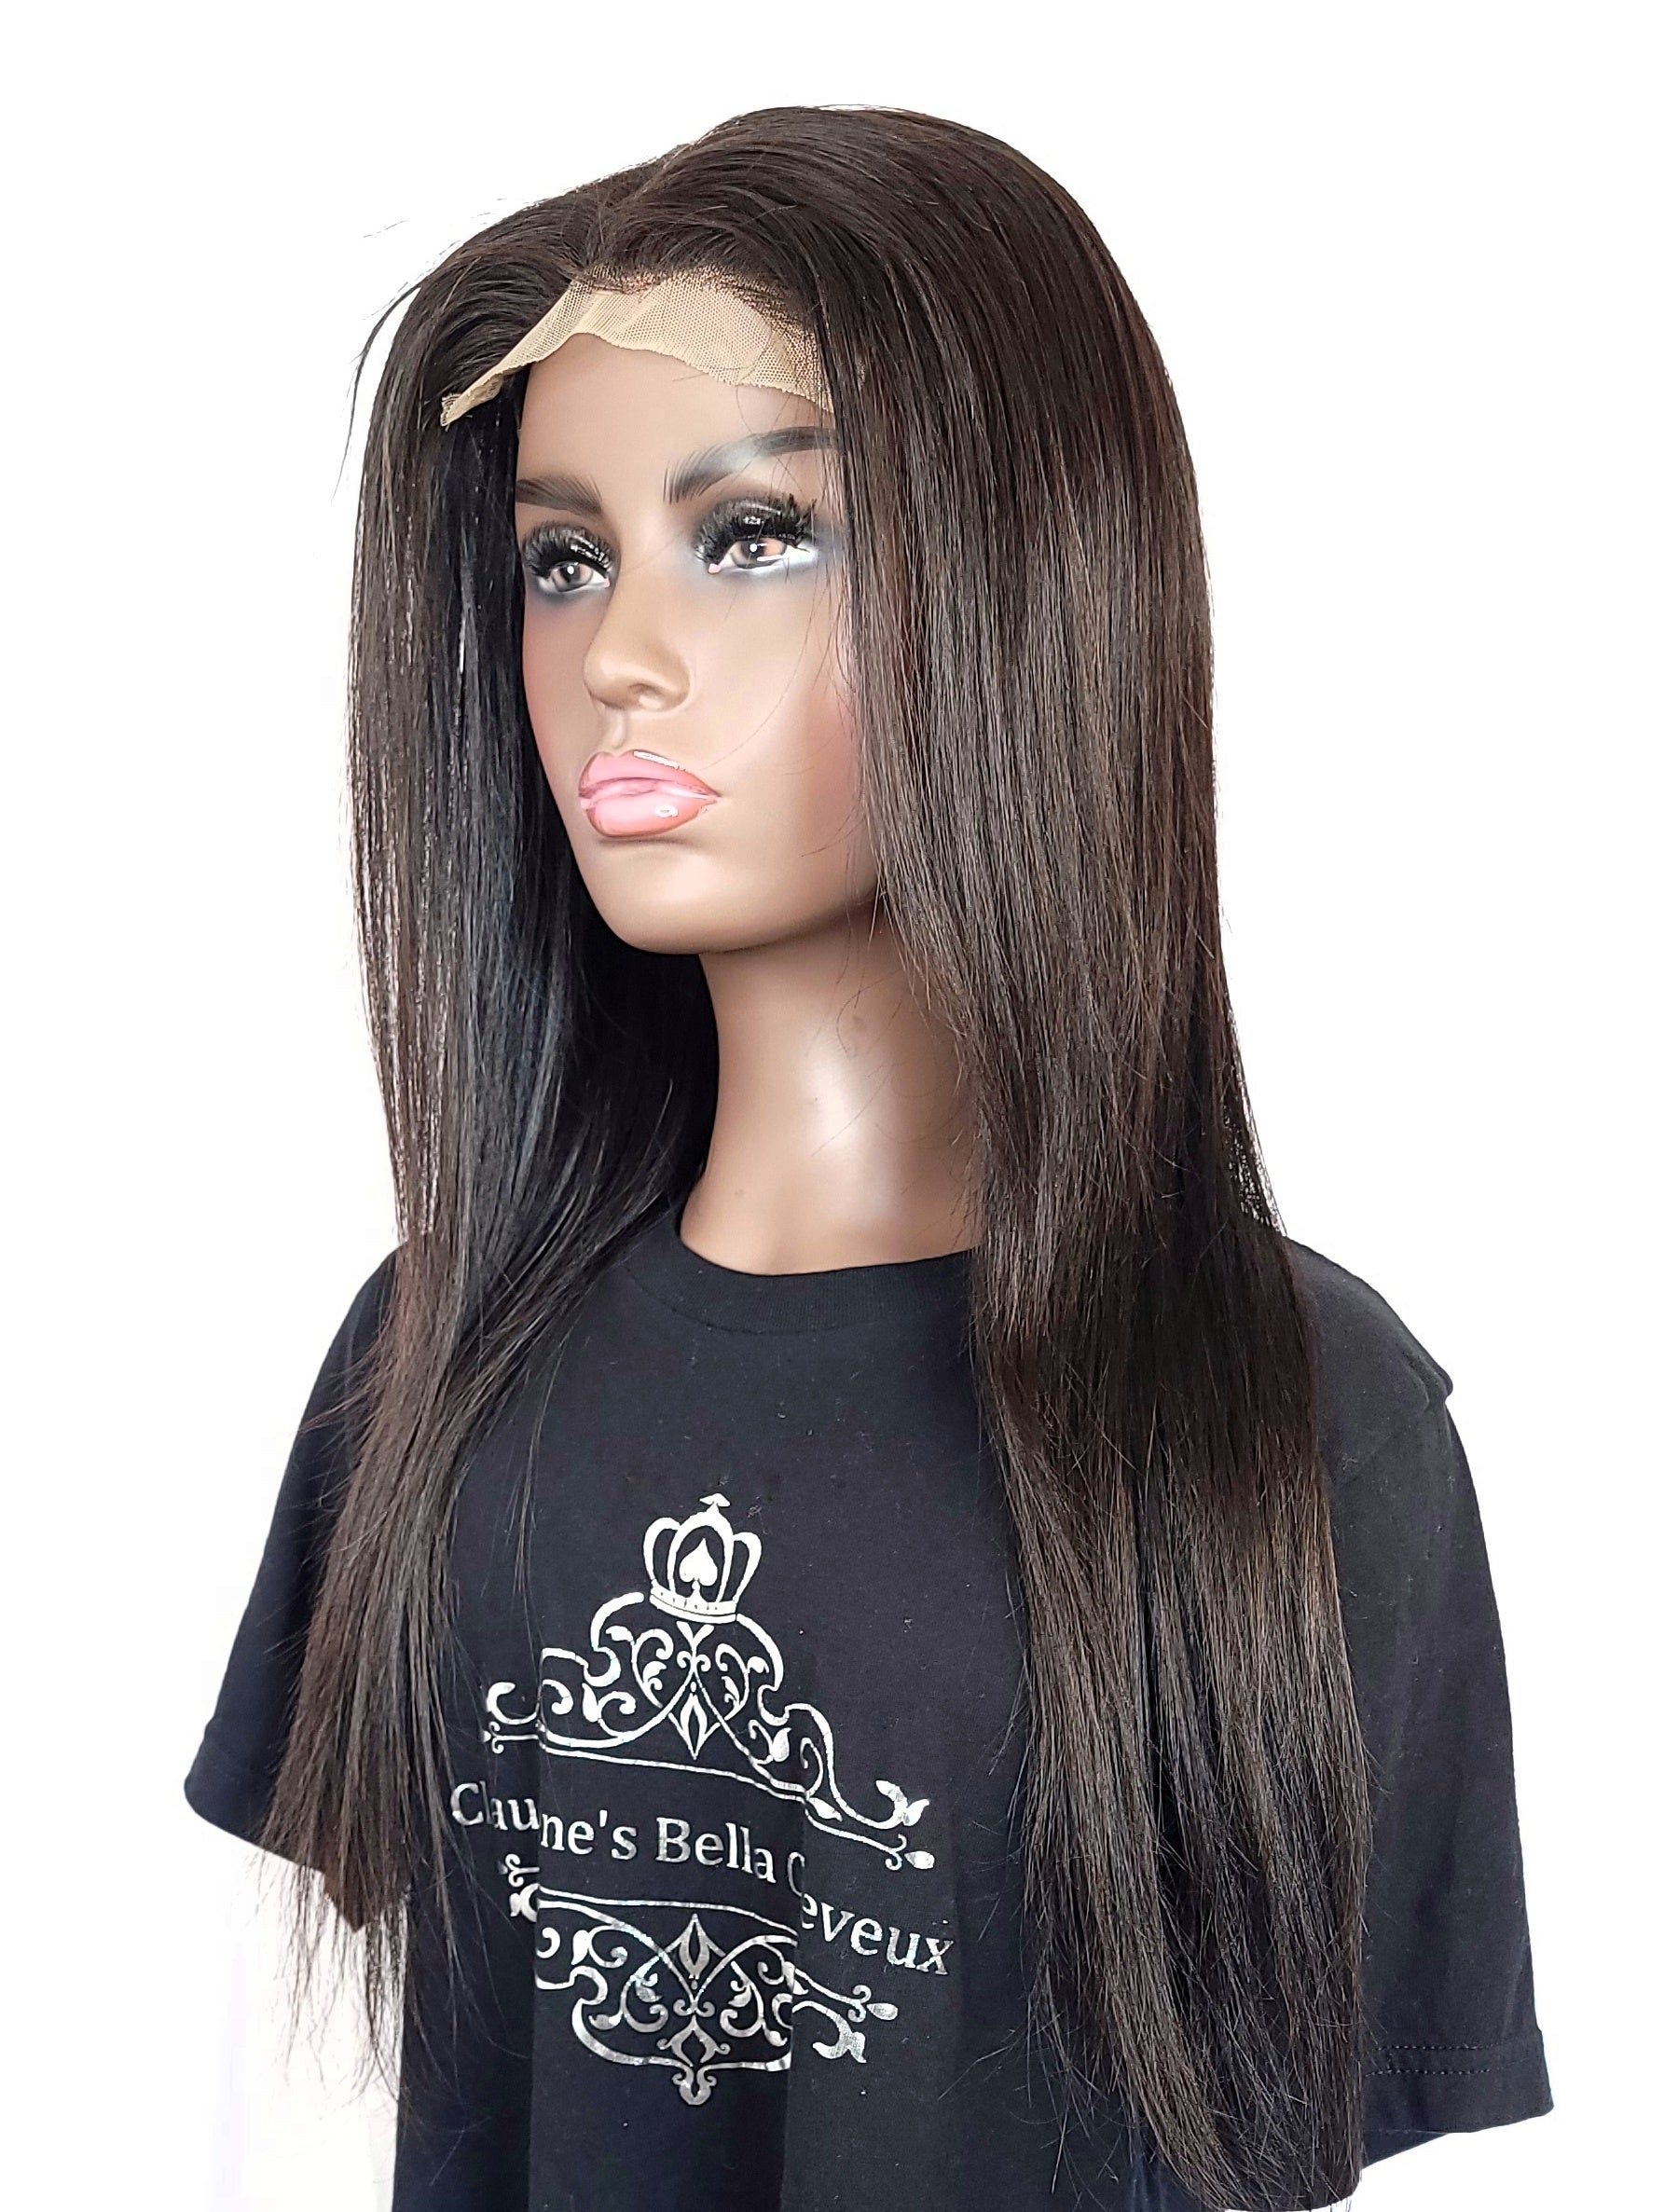 Premium luxury virgin human hair wig with a sleek, straight style and a versatile 5x5 closure, offering a natural and sophisticated look.